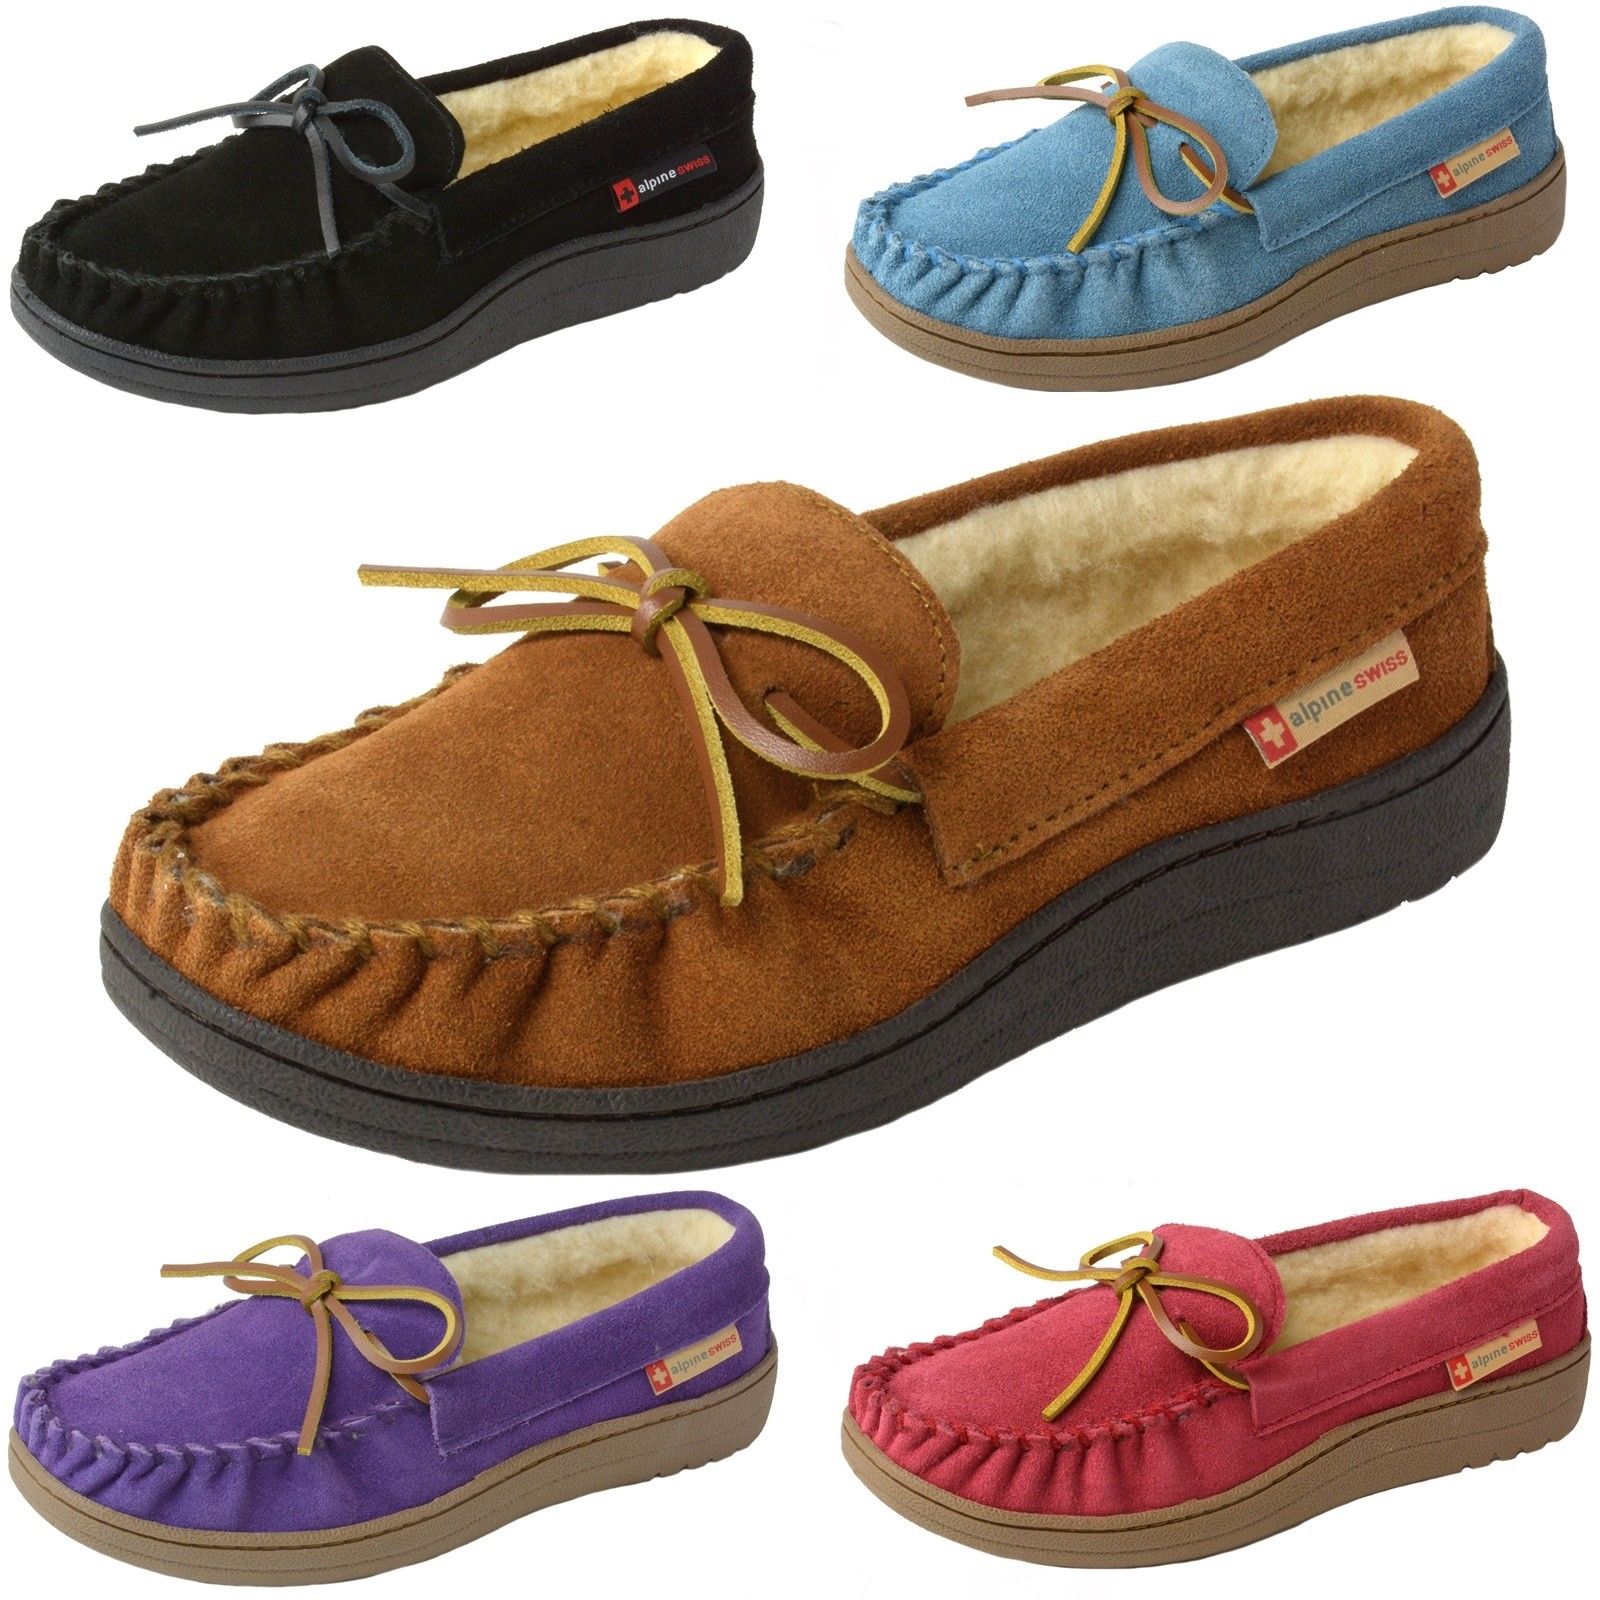 Alpine Swiss women’s suede shearling moccasin slippers for $15, free shipping